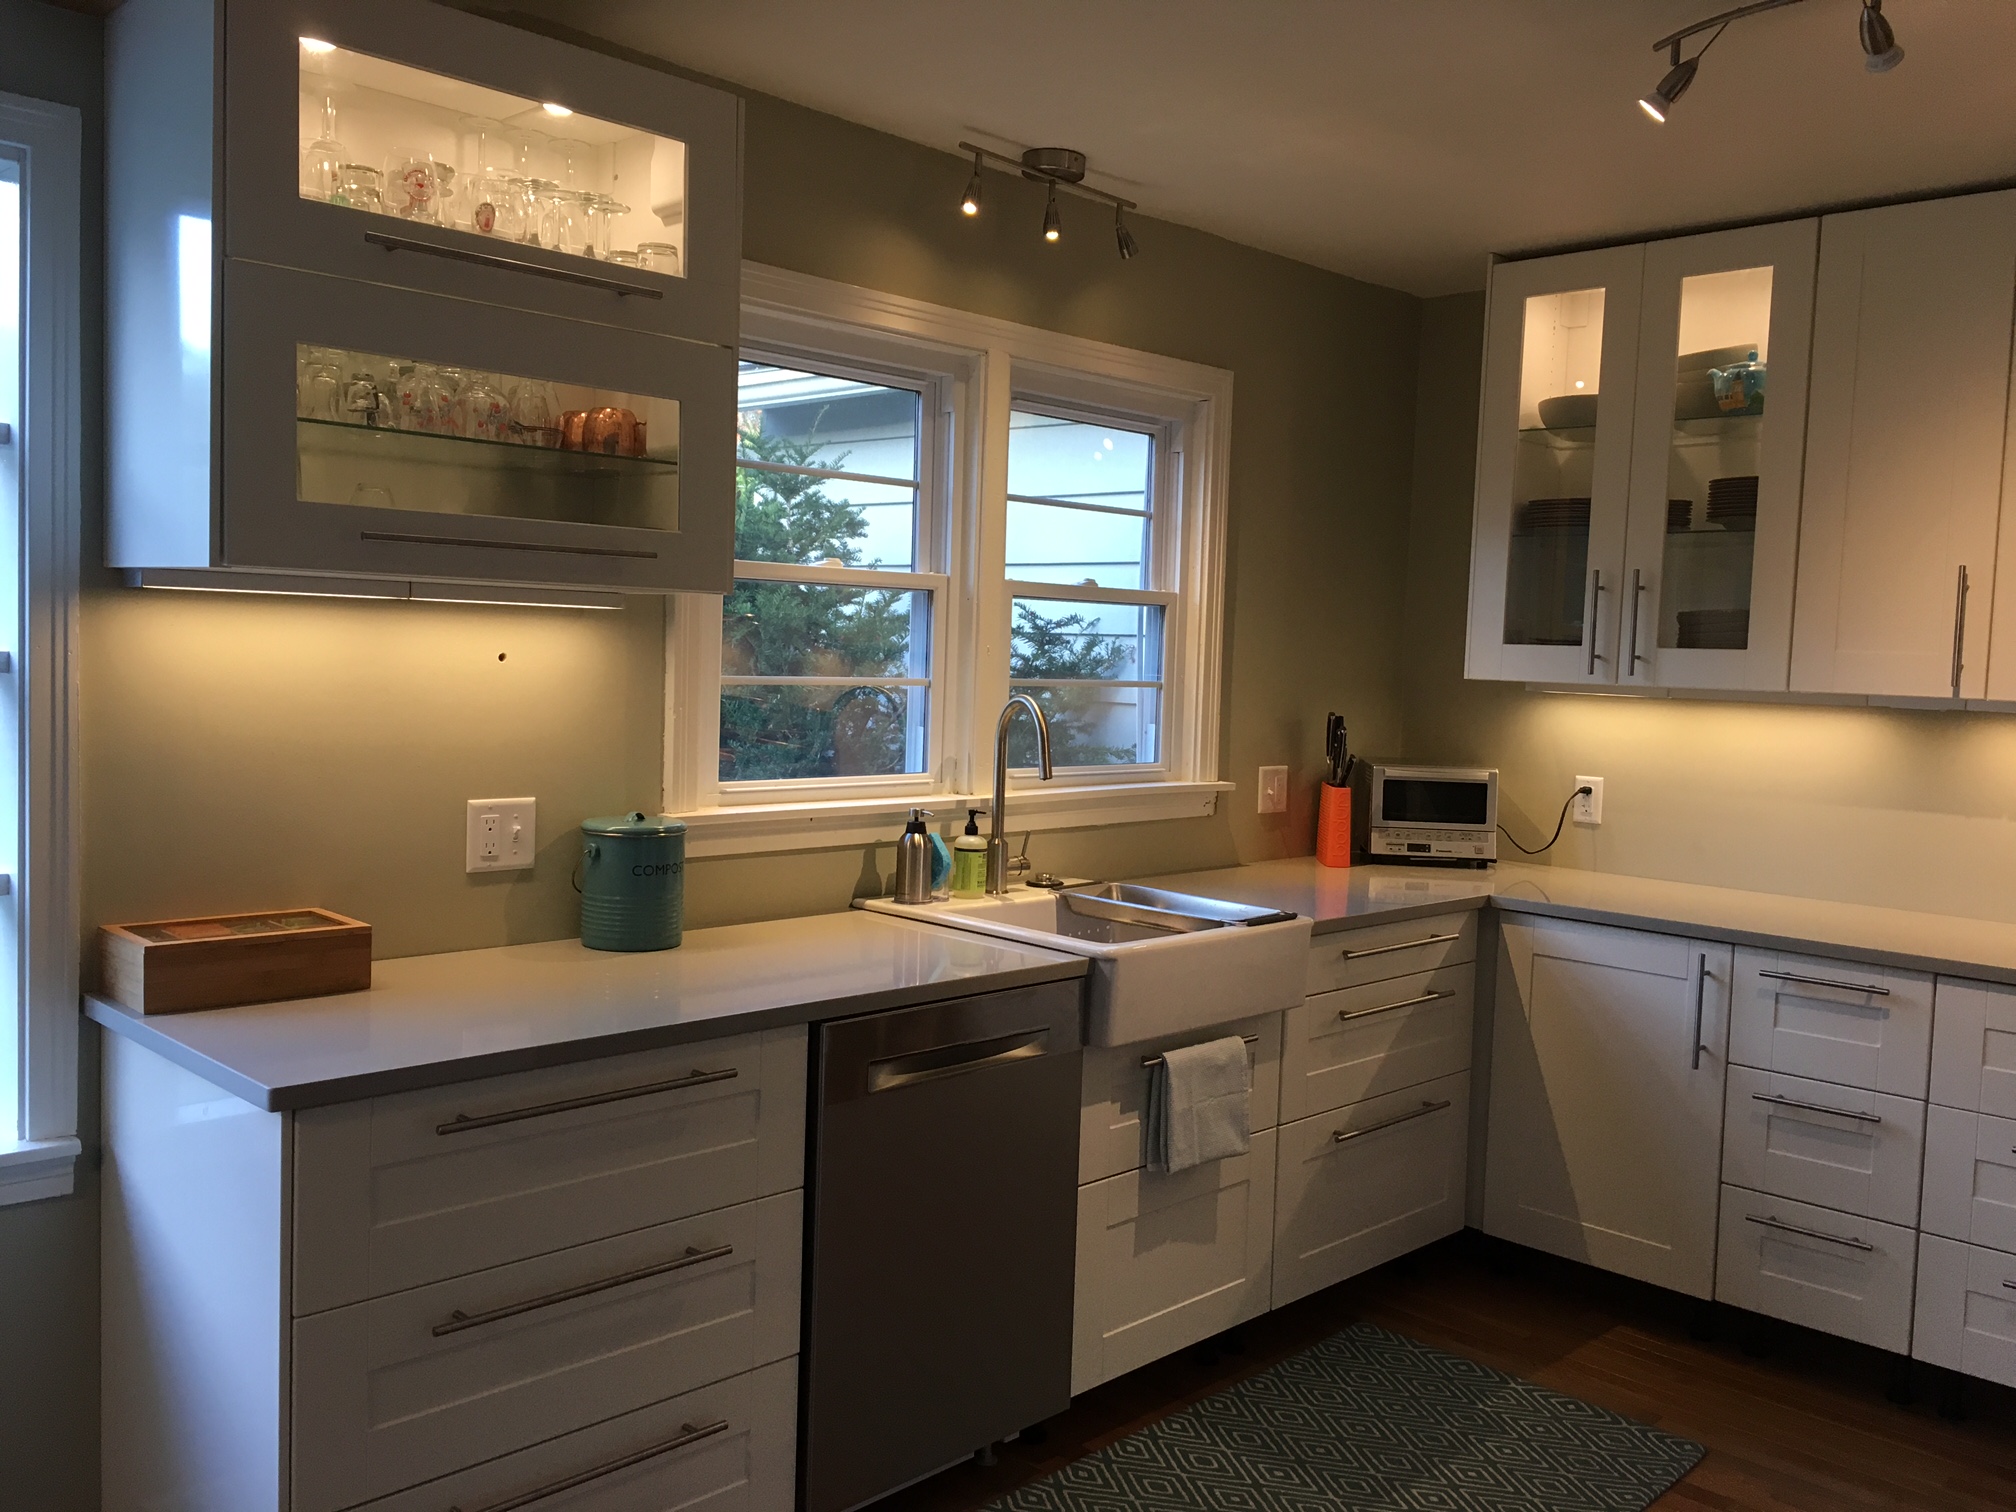 A Gorgeous Ikea Kitchen Renovation In Upstate New York